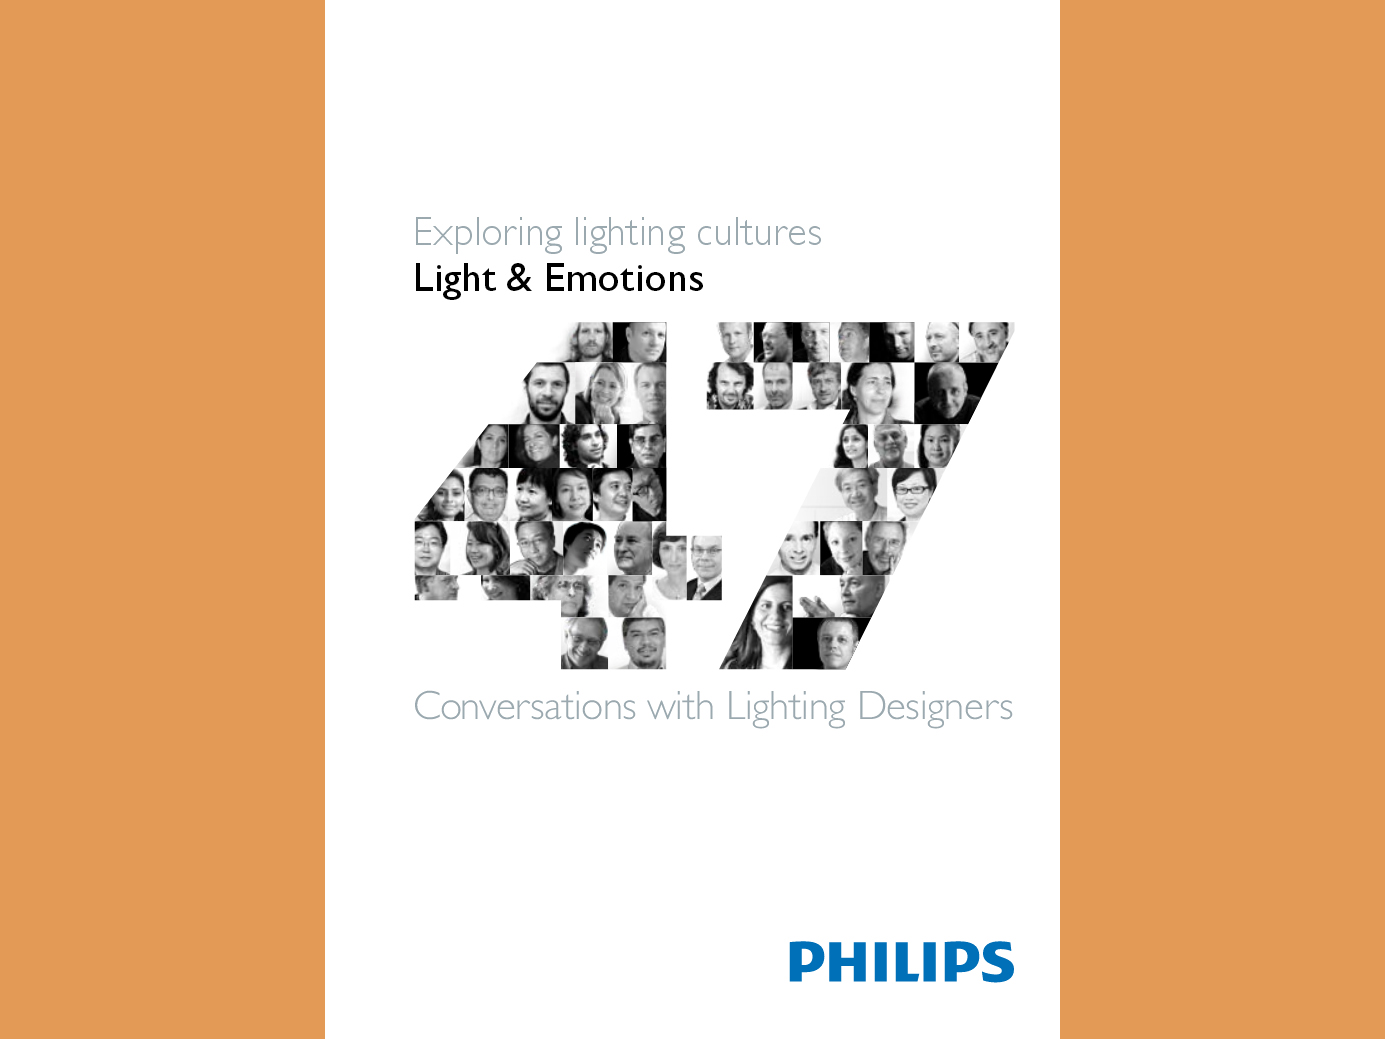 CBB’s Principals Interviewed in Philips Lighting Publication